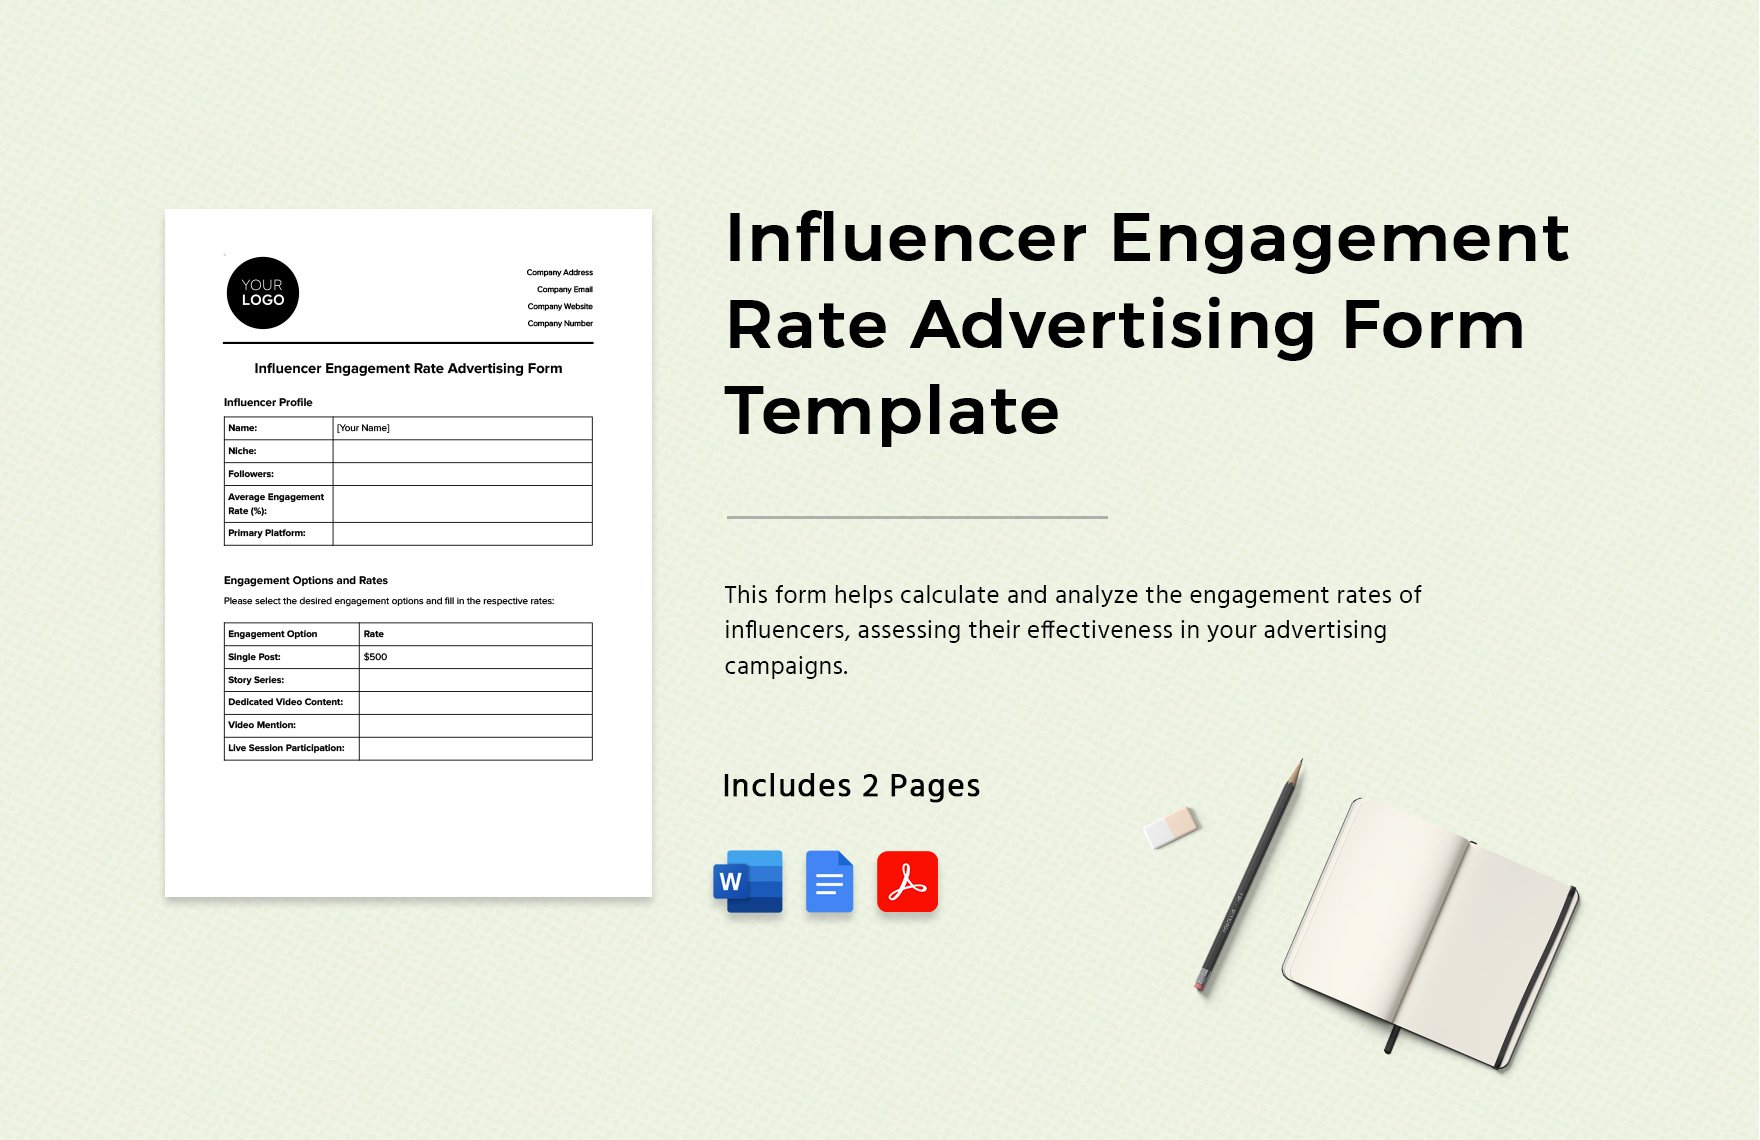 Influencer Engagement Rate Advertising Form Template in Word, Google Docs, PDF